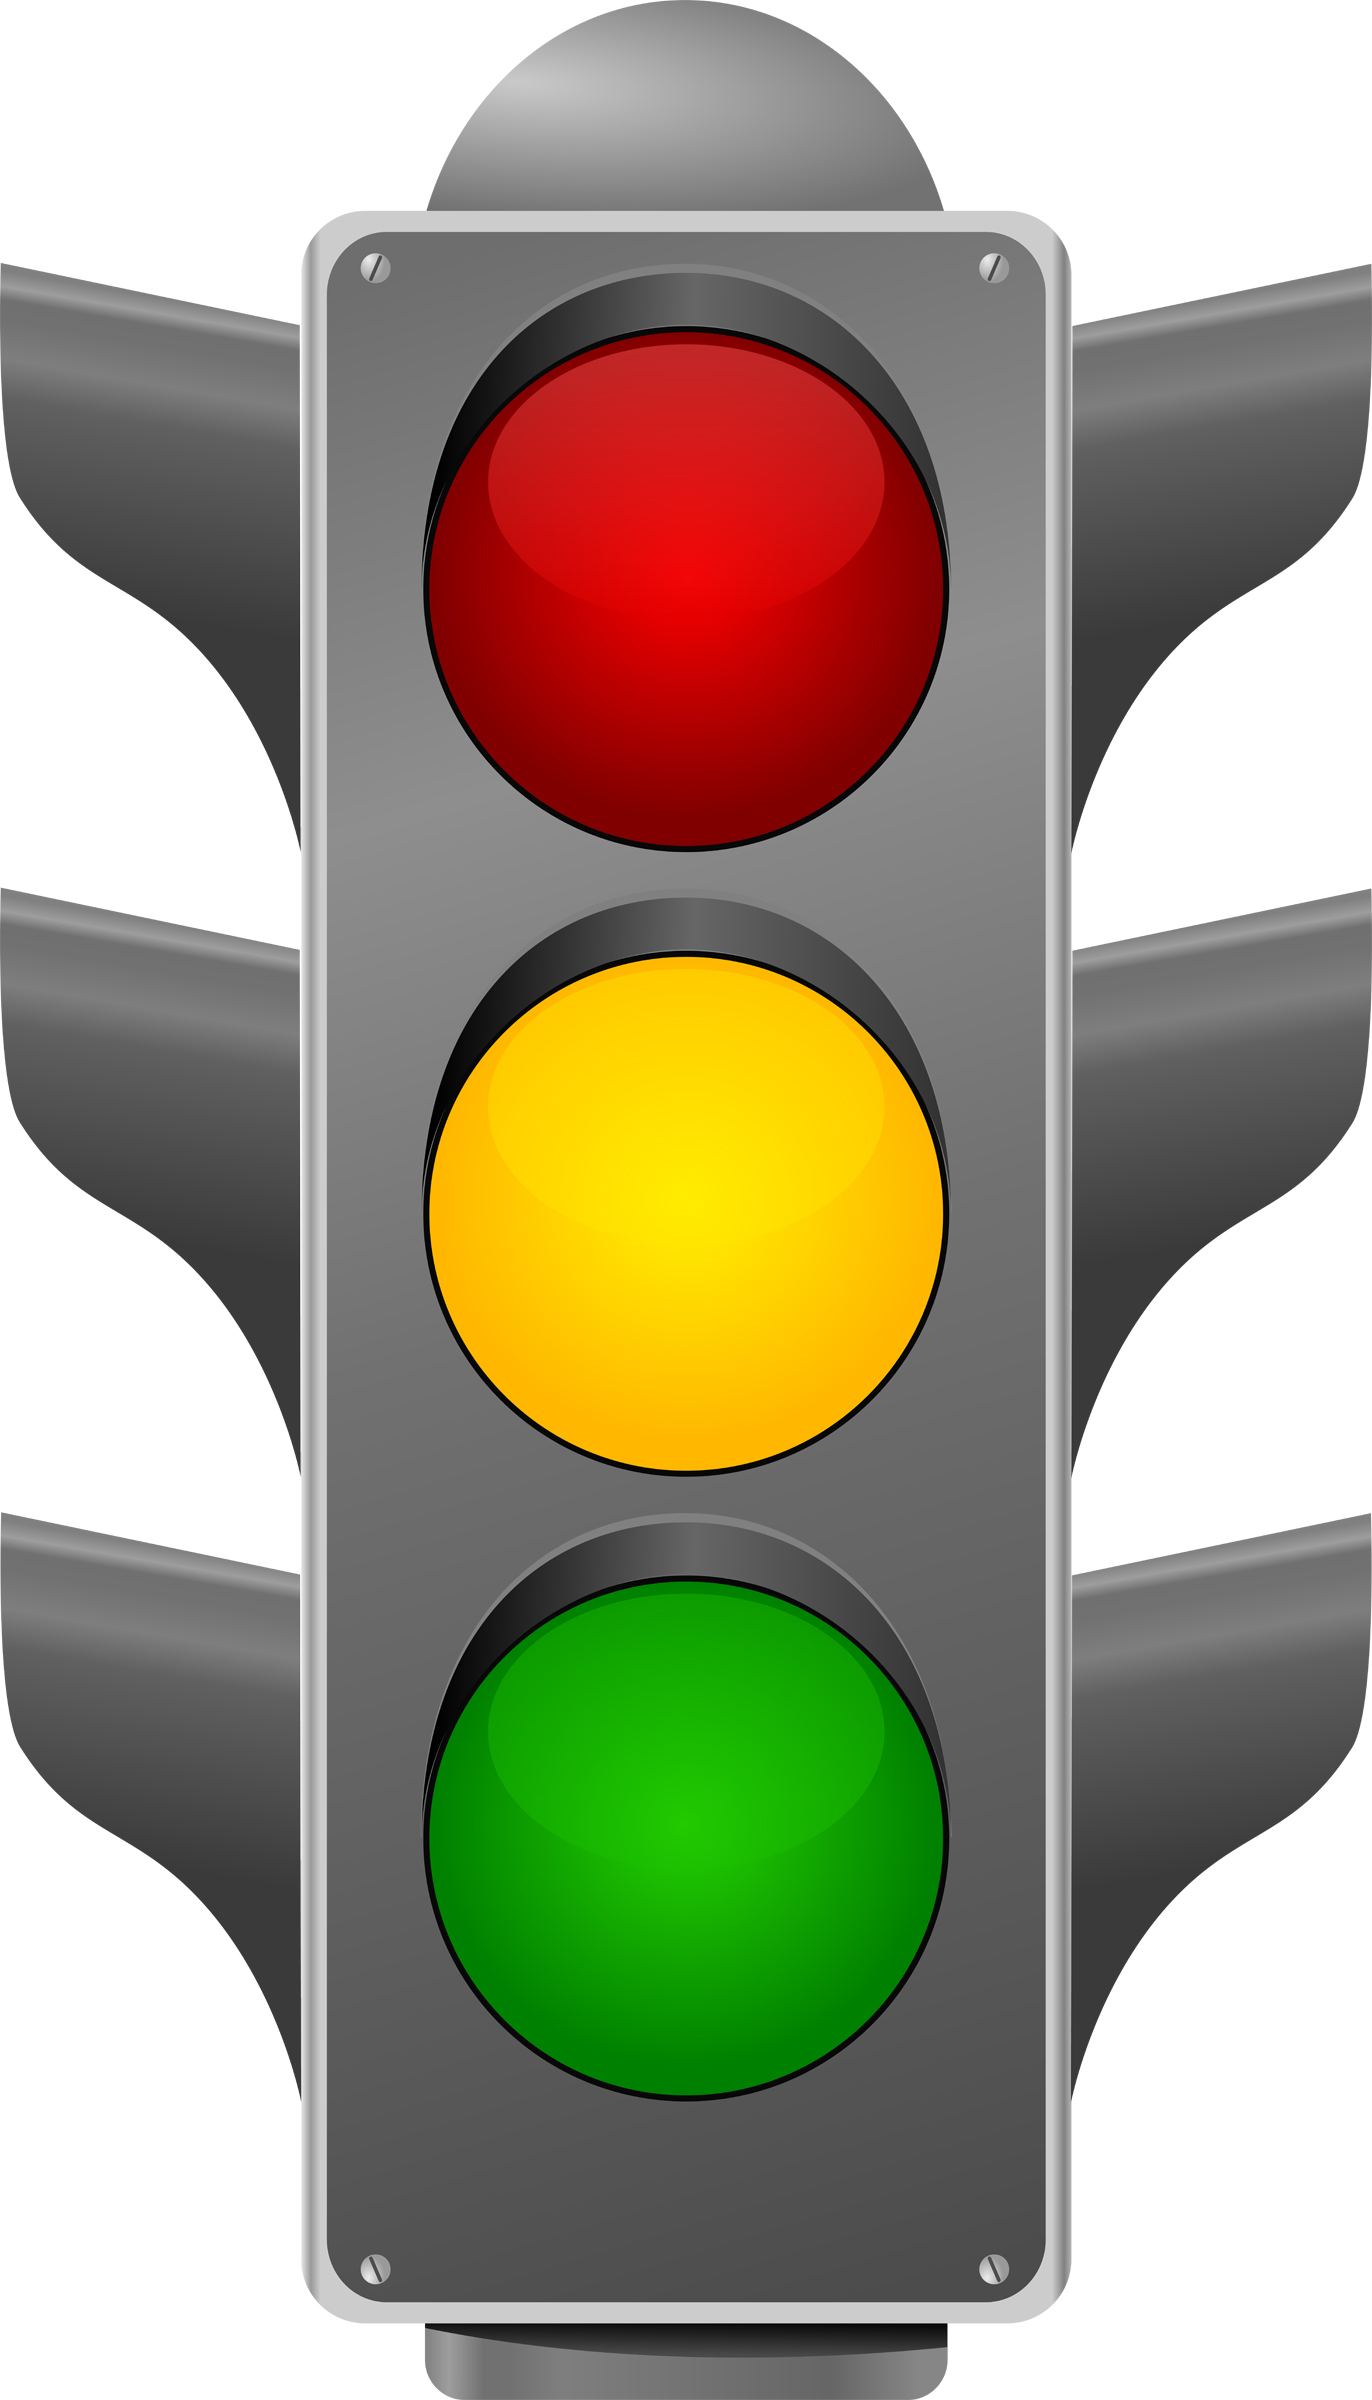 Yellow Stop Light Clipart - The Cliparts